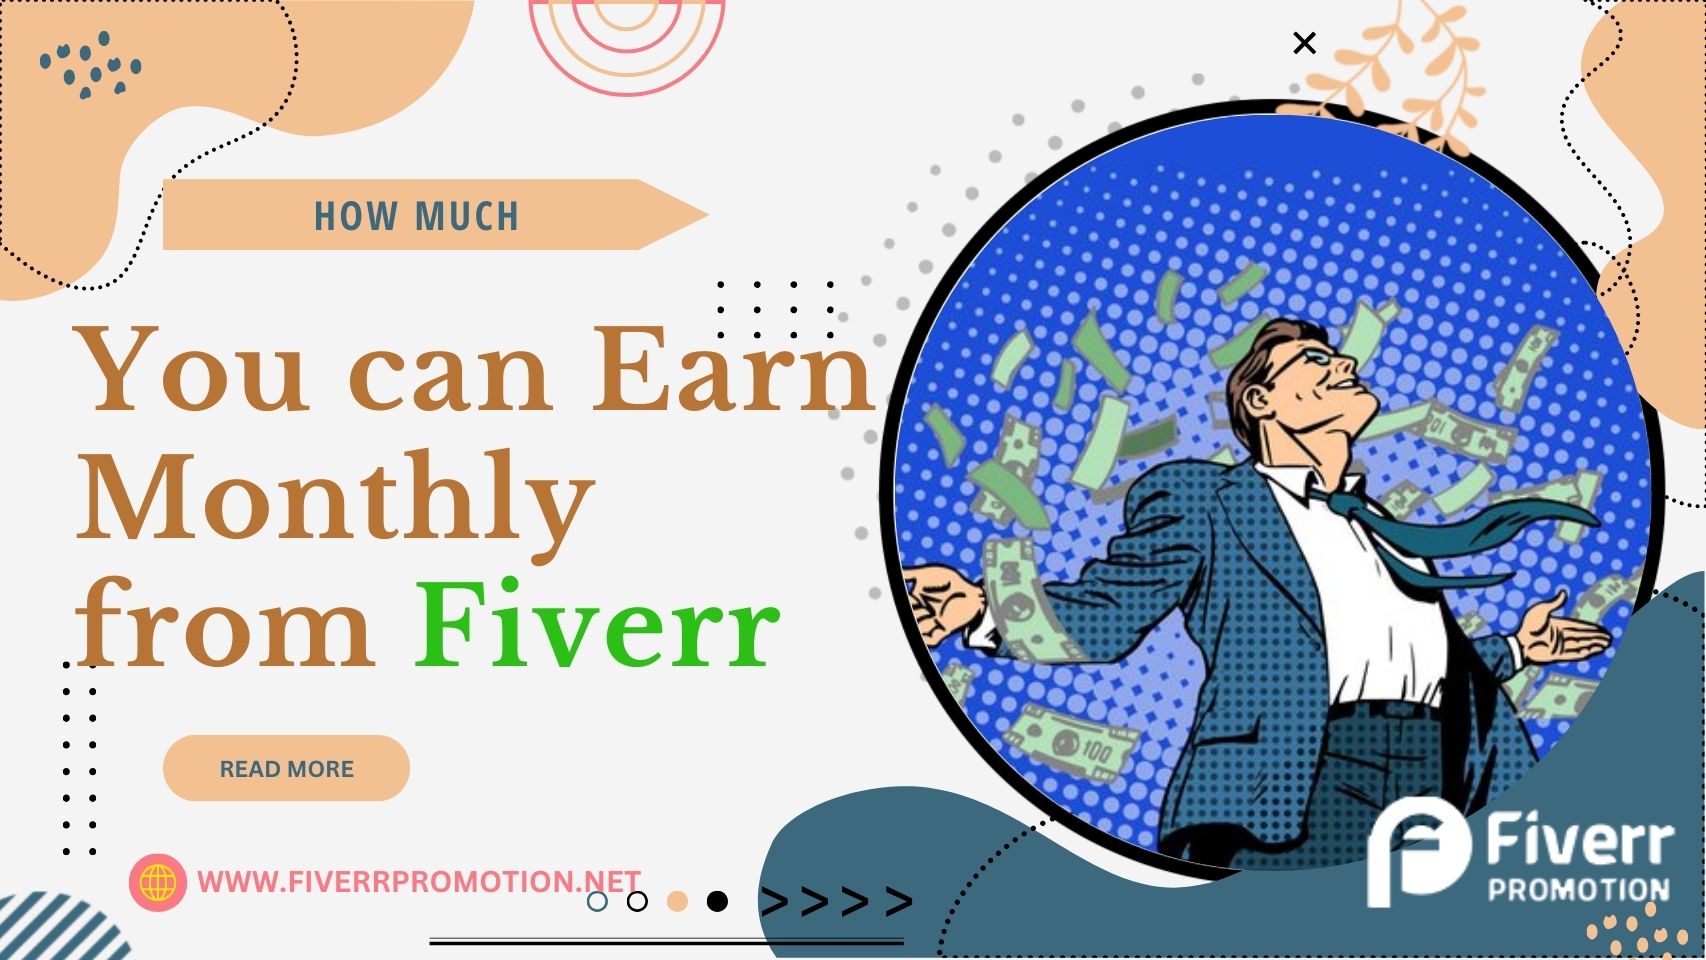 How much You can Earn Monthly from Fiverr